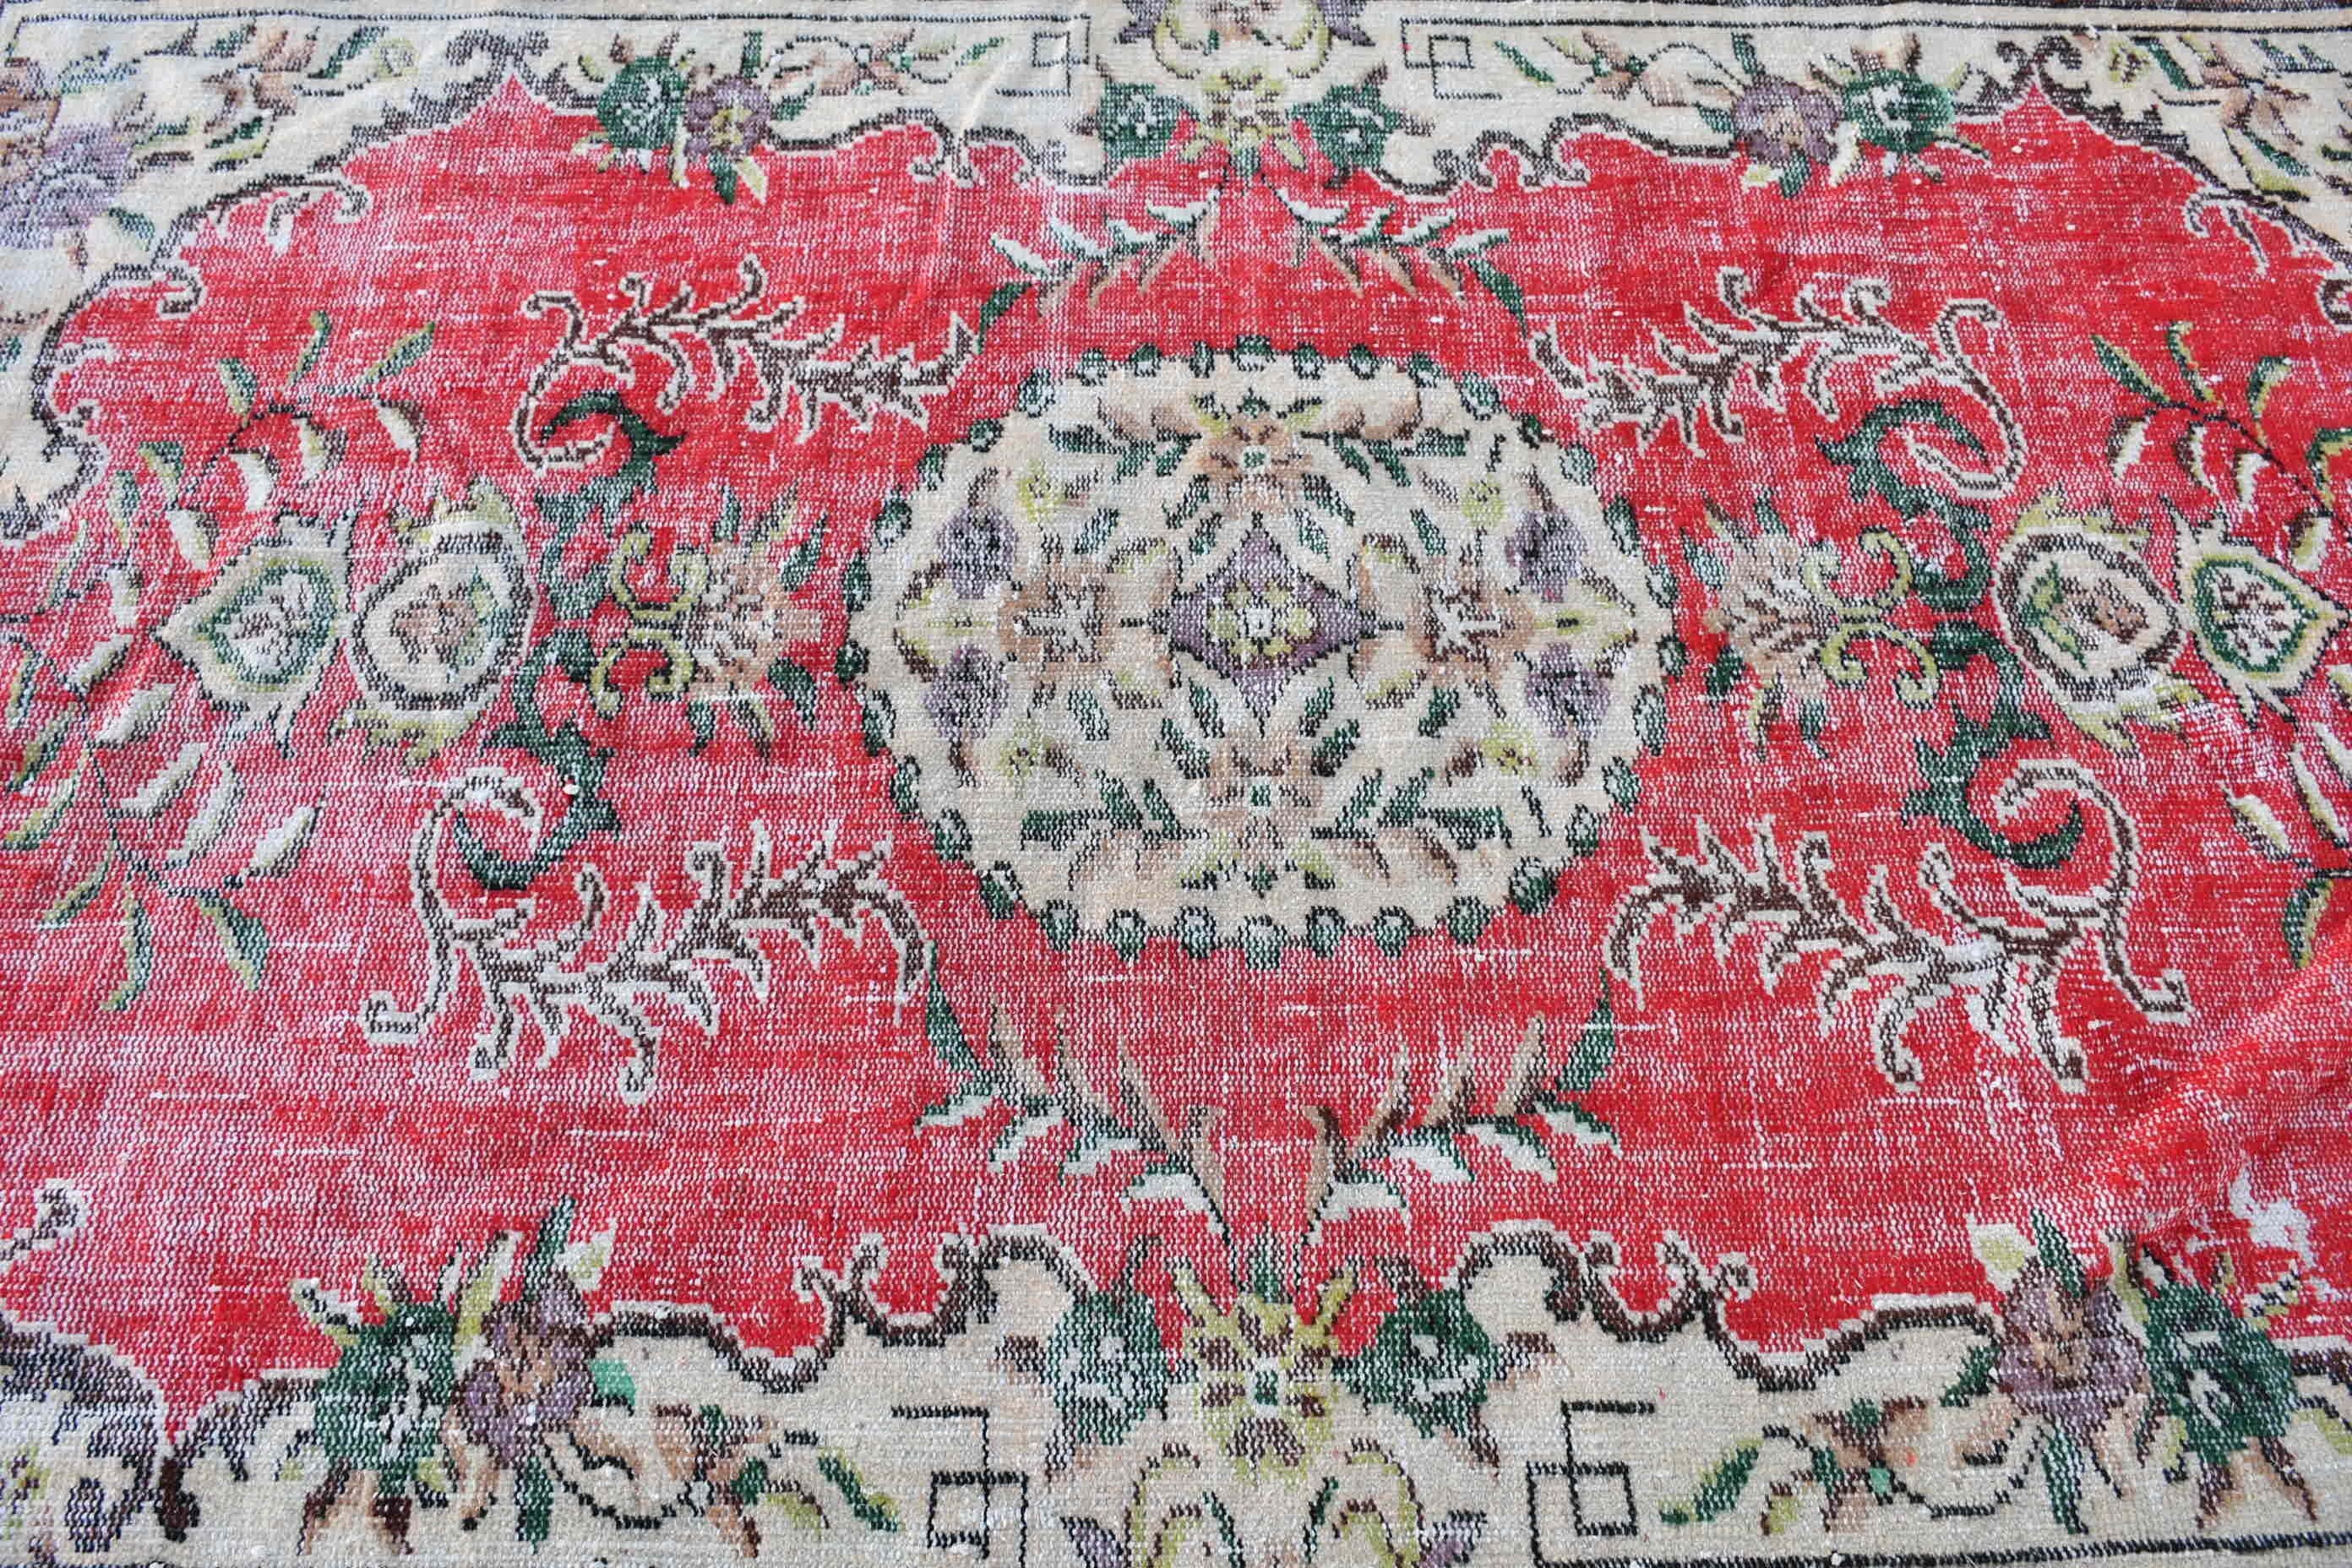 Home Decor Rug, Living Room Rug, Moroccan Rug, 5.4x8.9 ft Large Rugs, Dining Room Rugs, Vintage Rugs, Turkish Rugs, Red Moroccan Rug